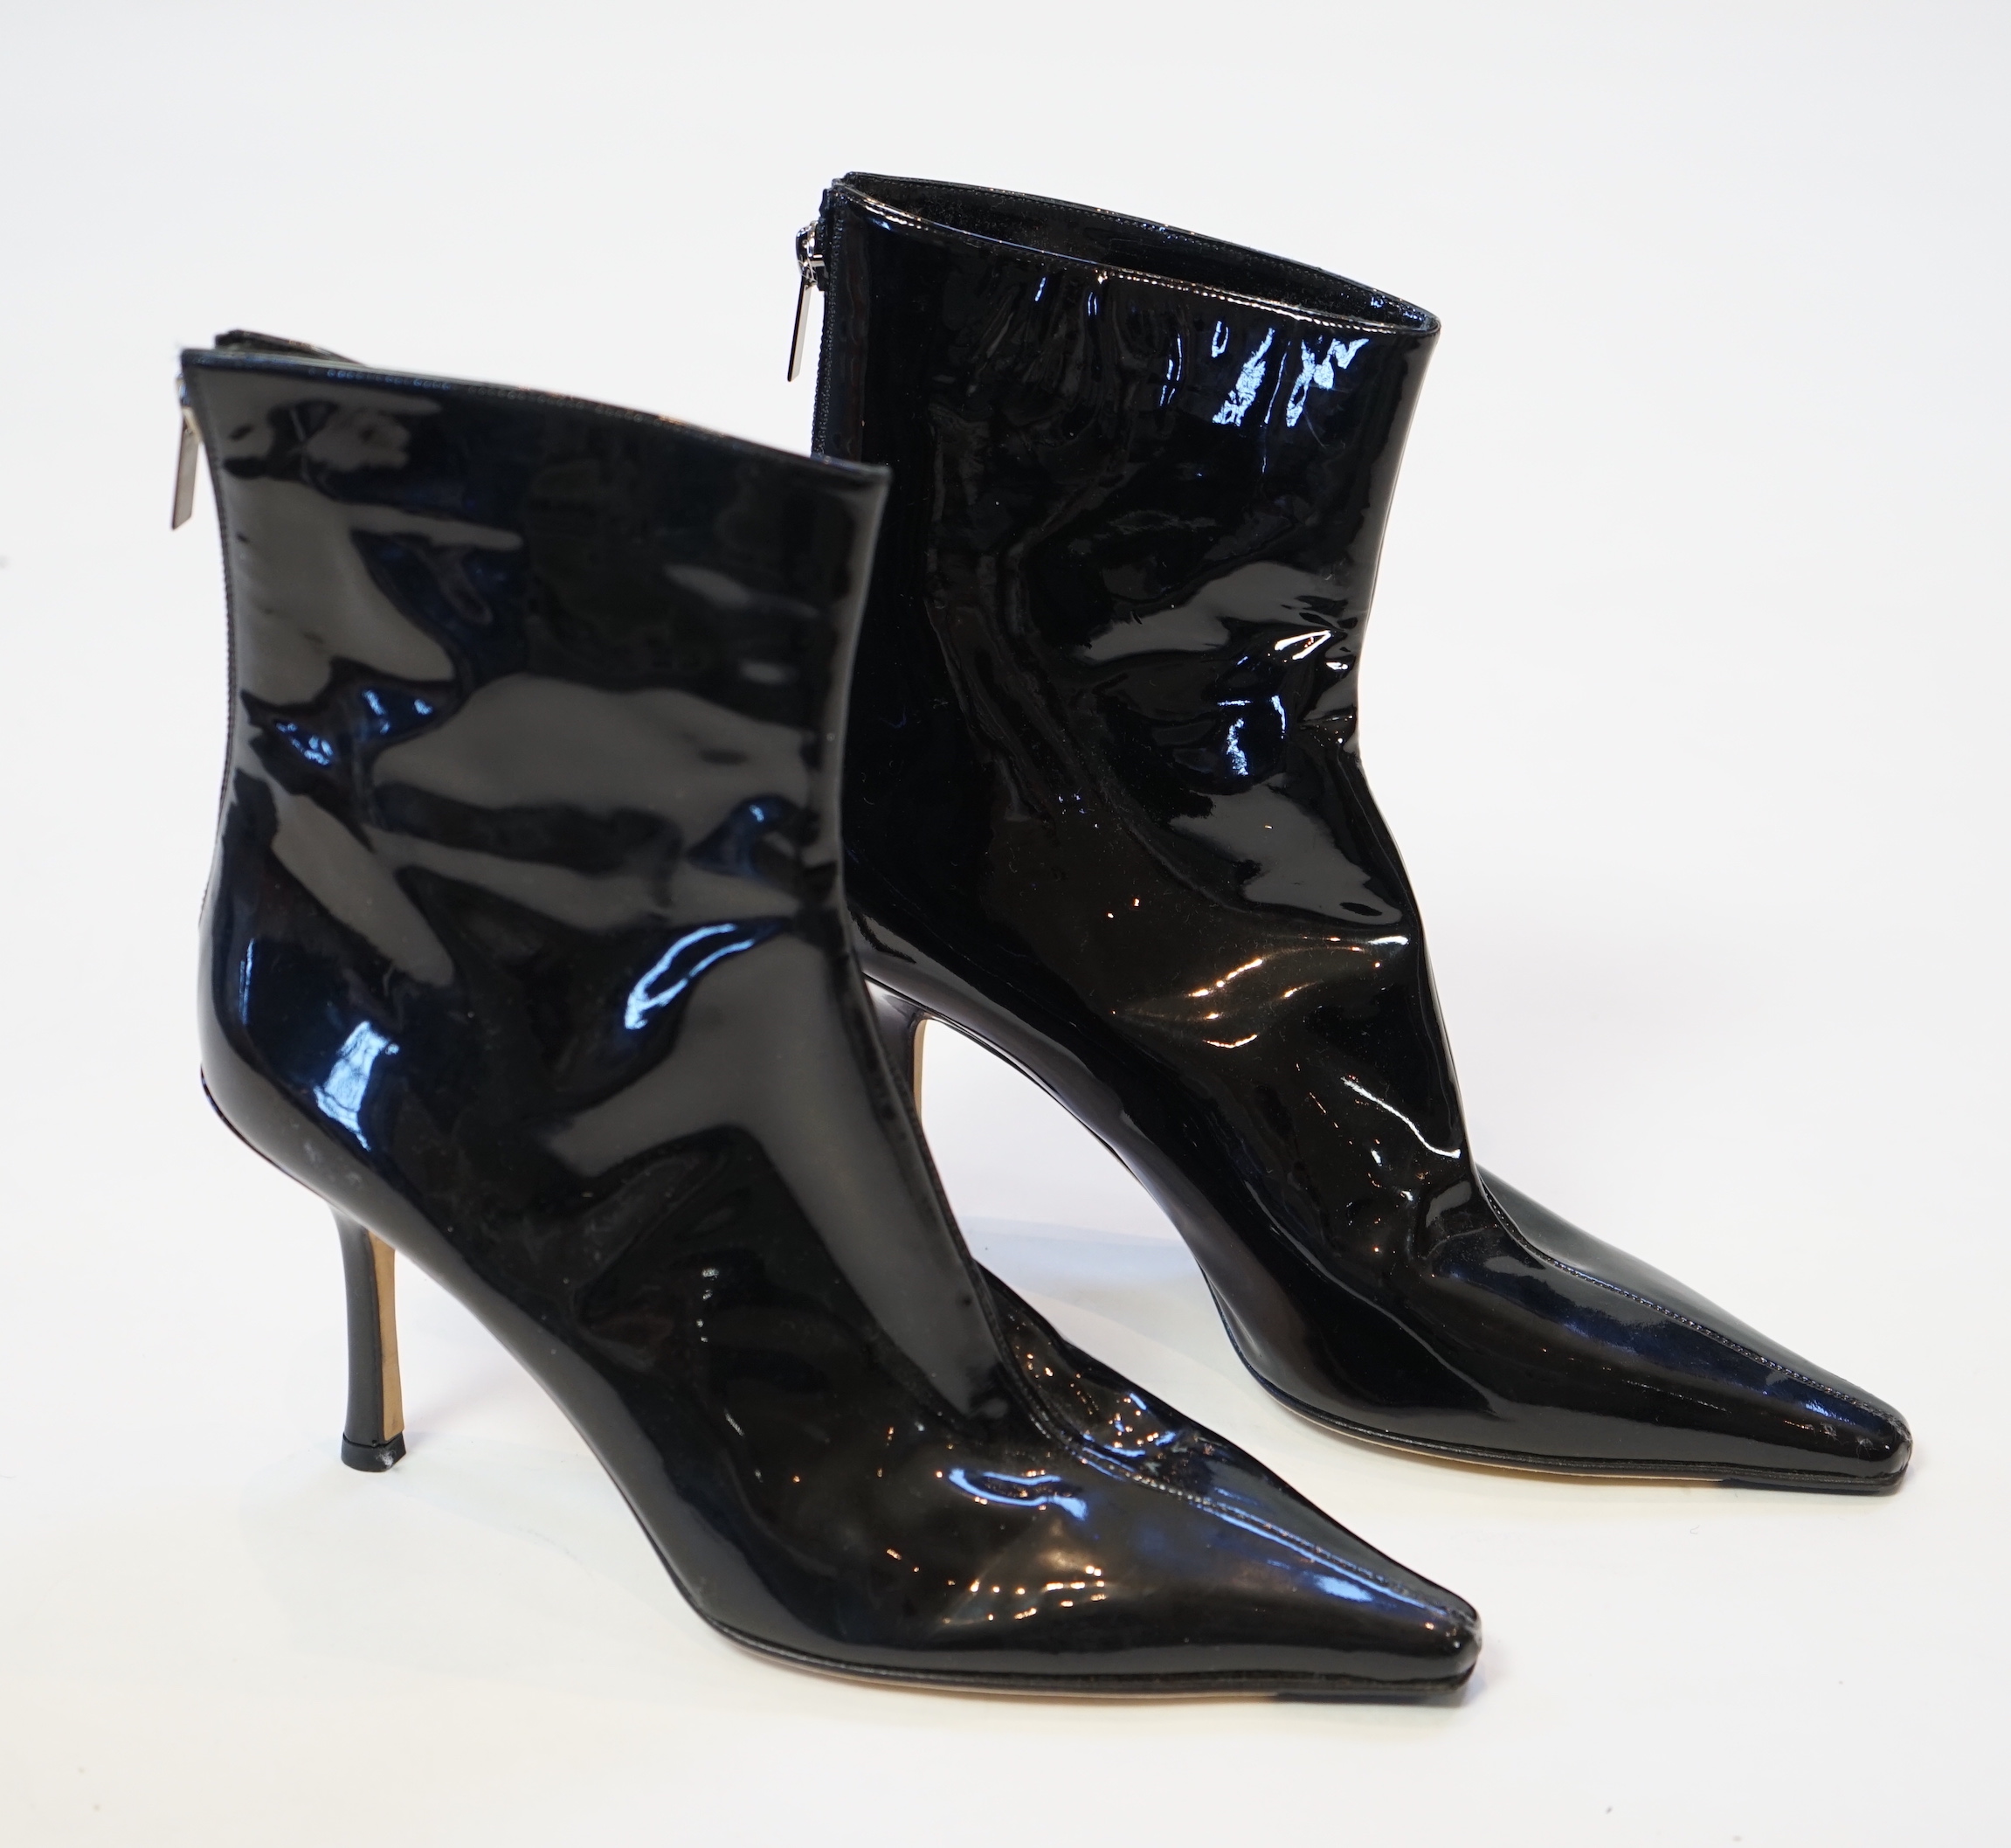 Two pairs of Jimmy Choo black leather heeled lady's boots, size EU 39